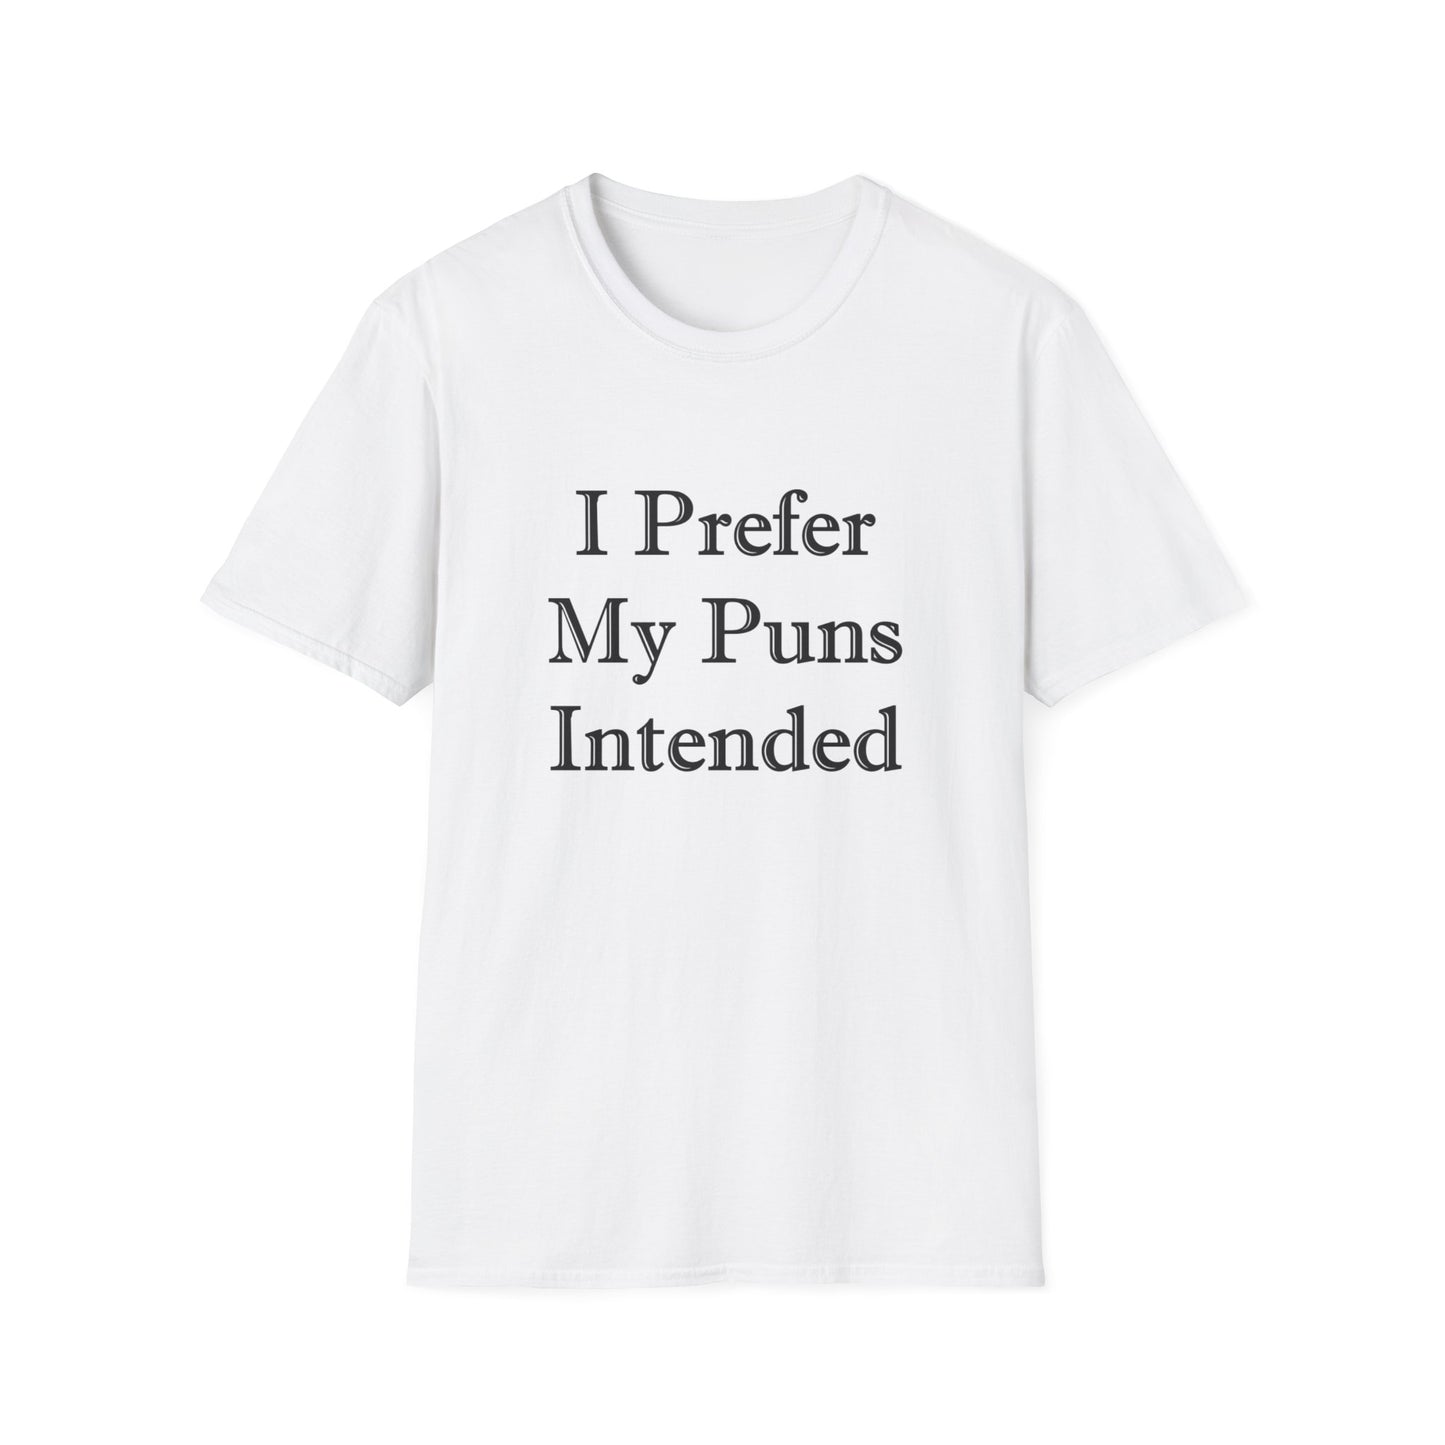 A white t-shirt with the words: I Prefer My Puns Intended